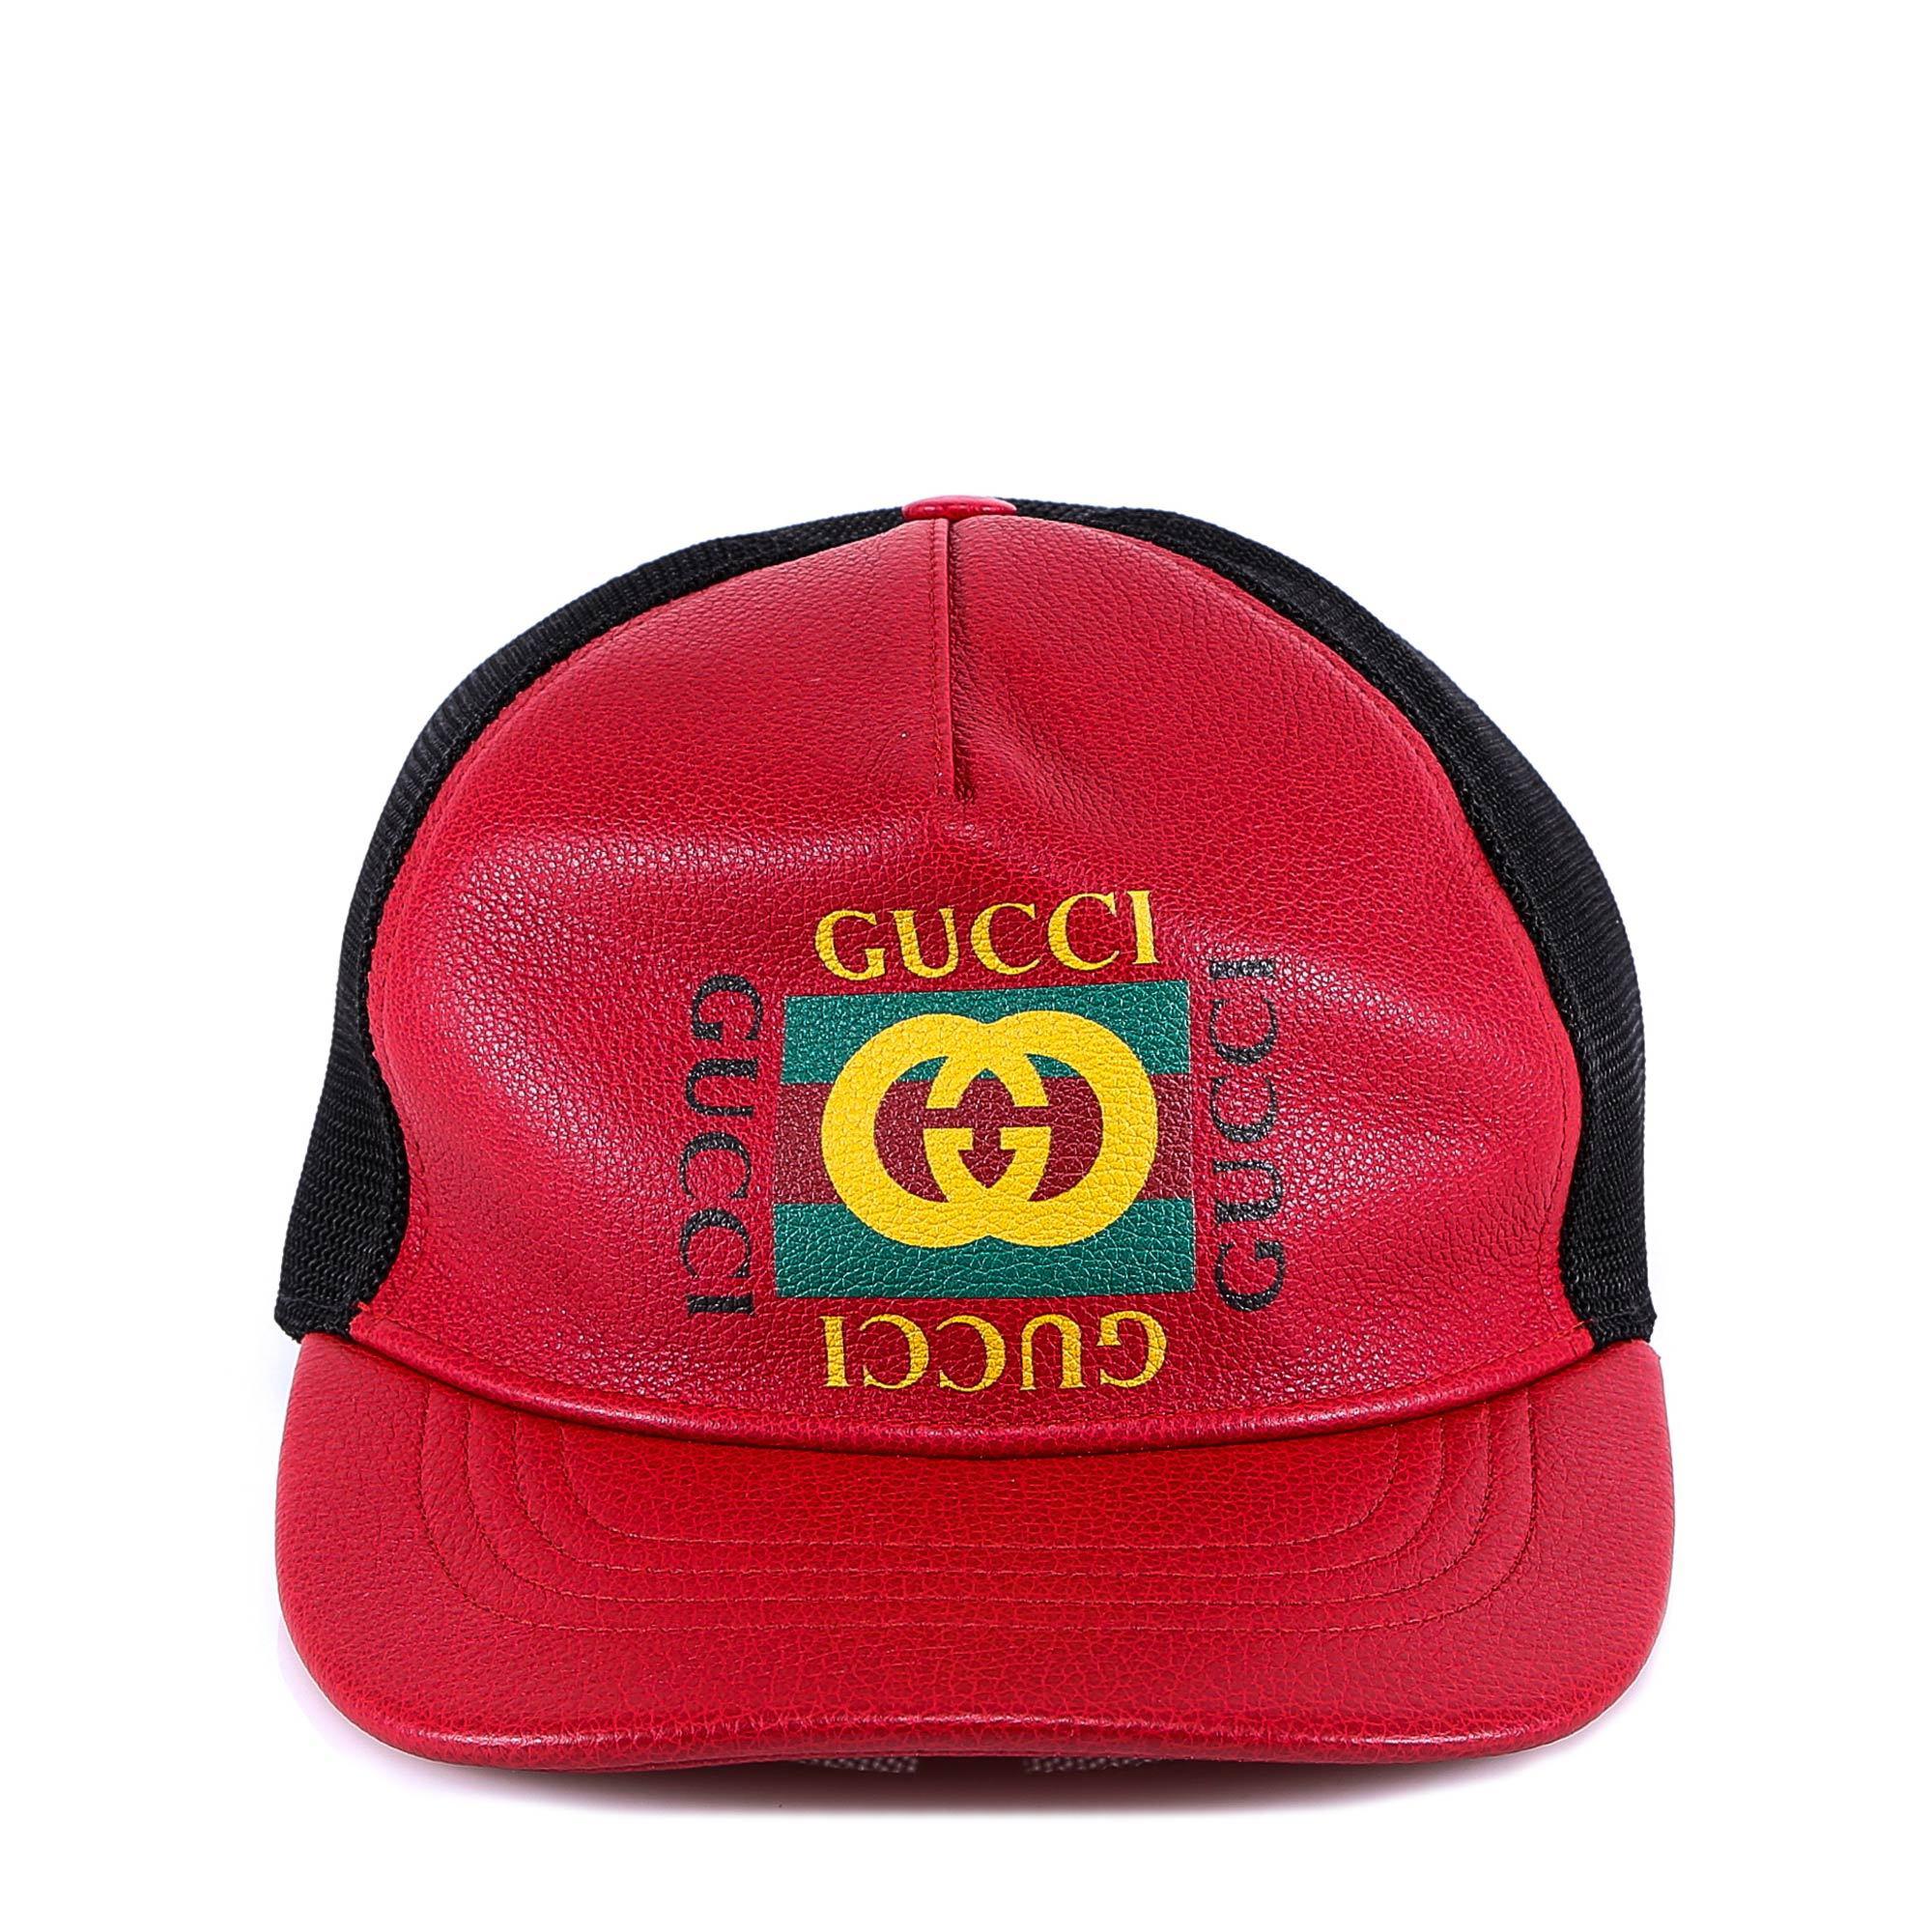 Gucci Leather Branded Baseball Cap in 